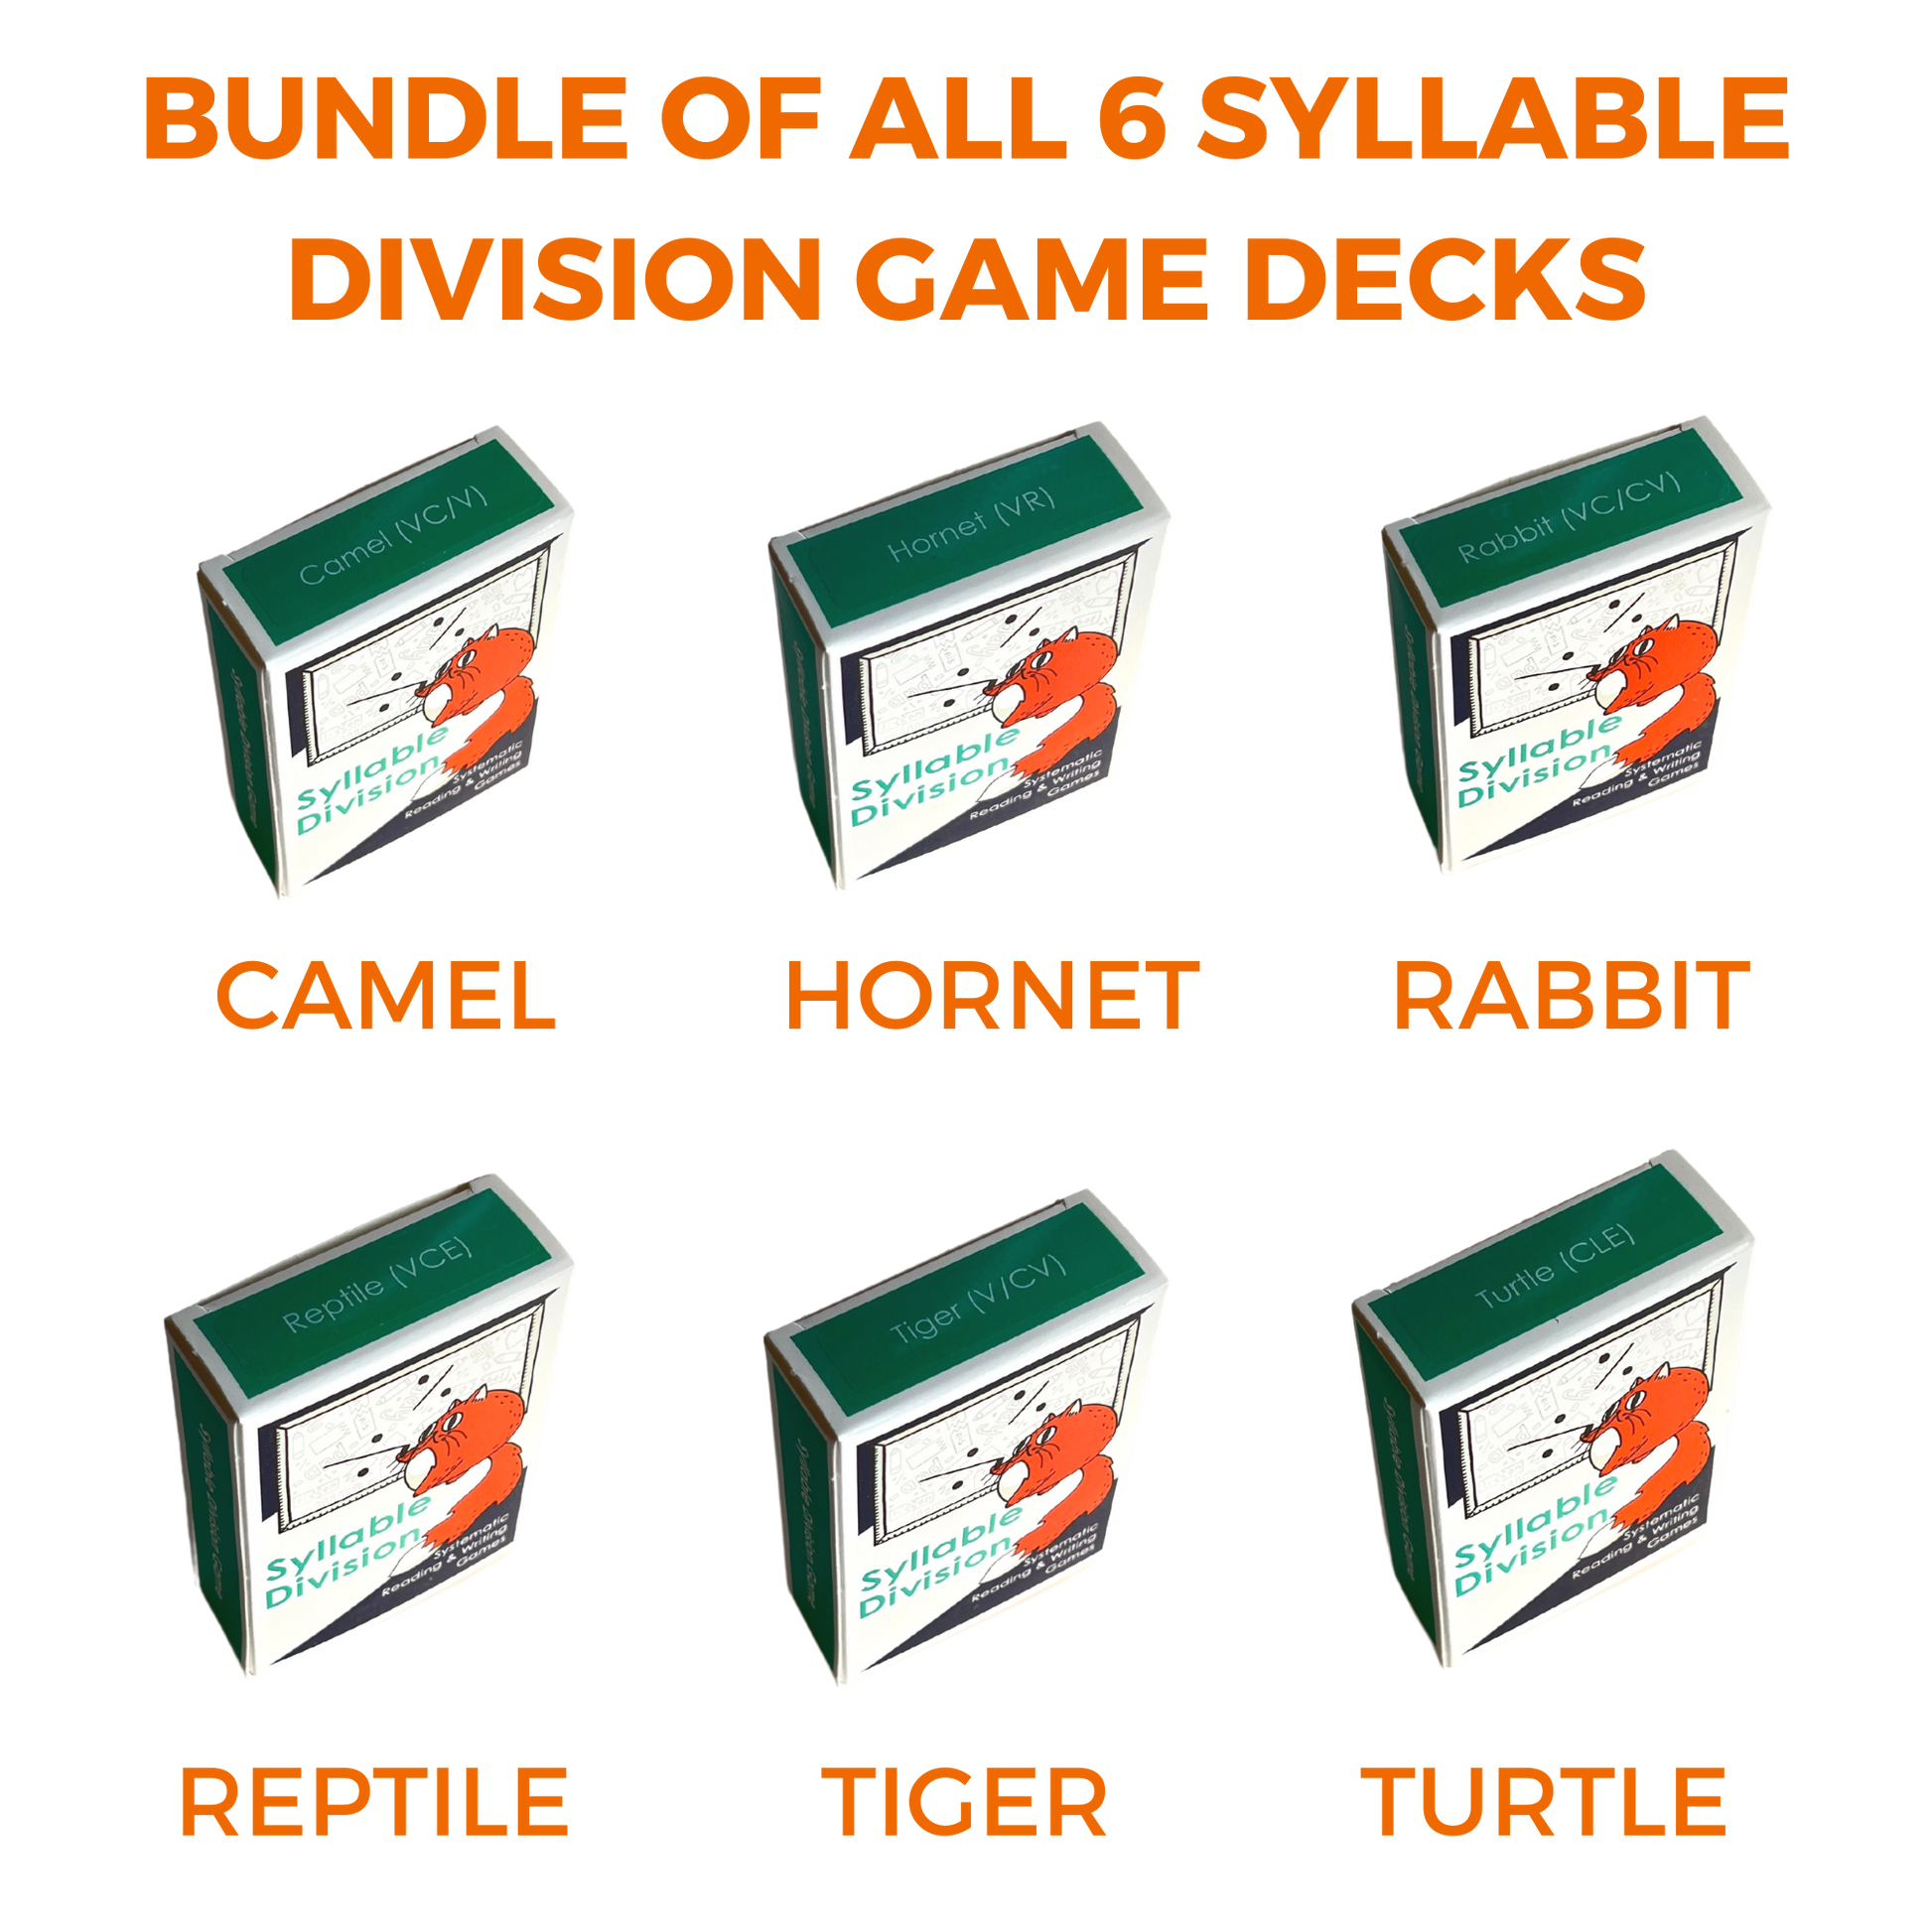 The Syllable Division Card Games Bundle includes all six (6) of the syllable division card games